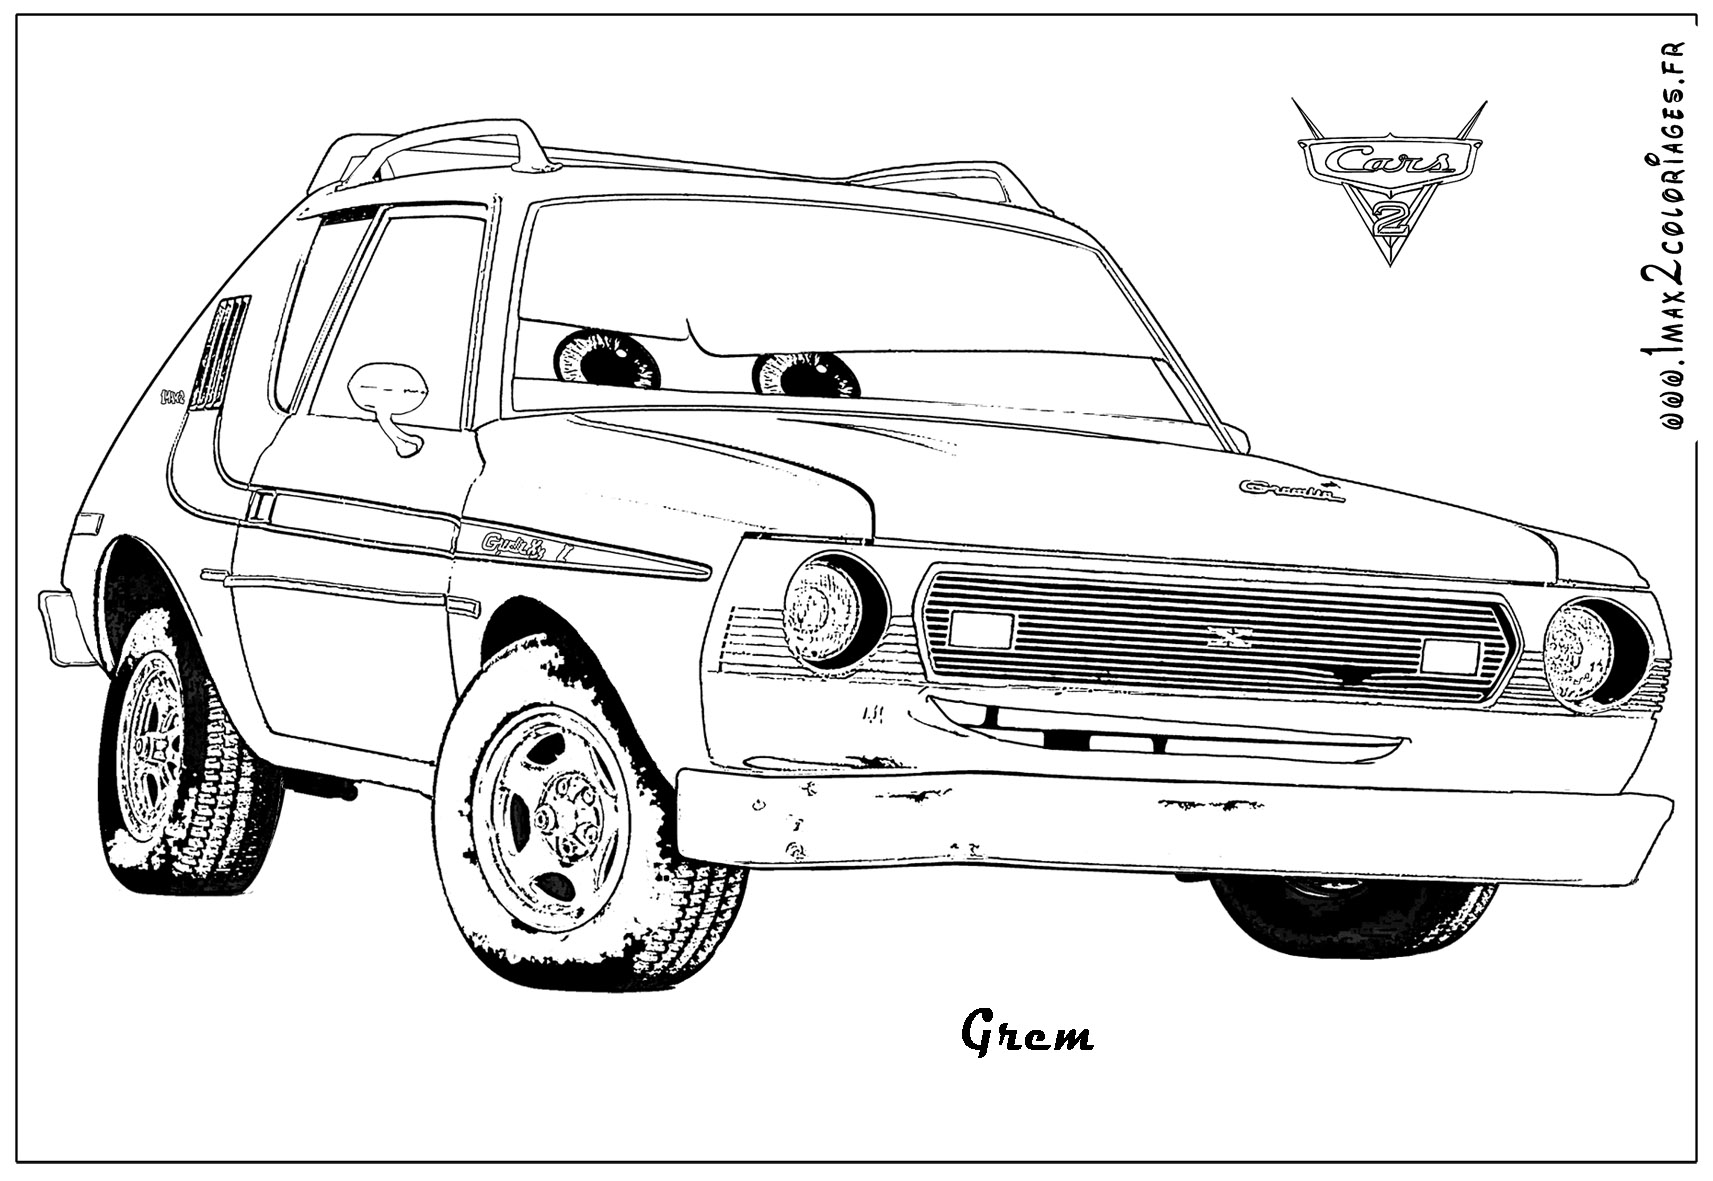 7300 Top Coloring Pages Cars2 Images & Pictures In HD